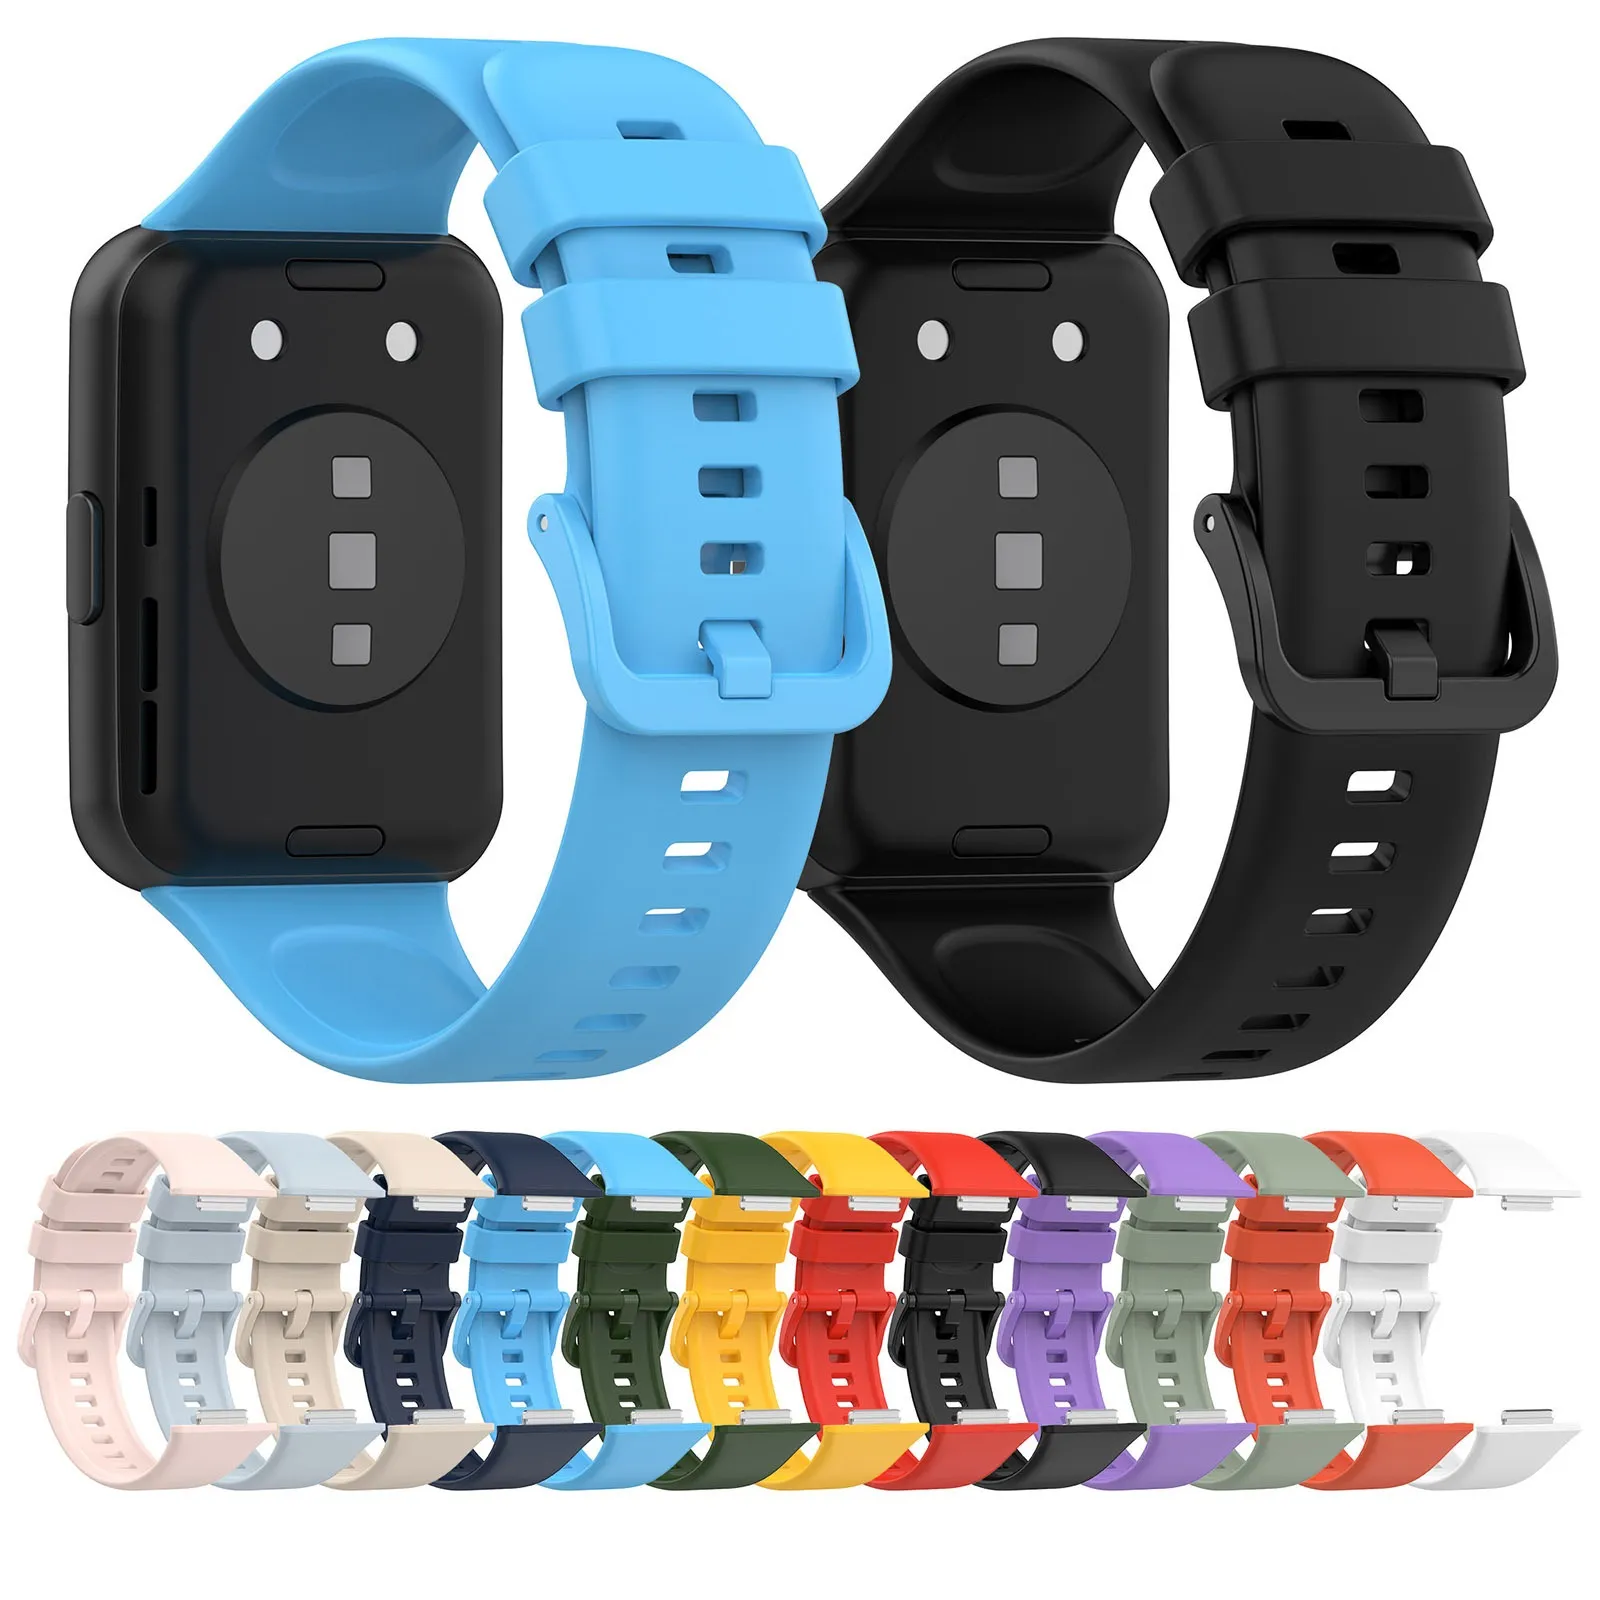 Silicone Band For Huawei Watch FIT 2 fit2 Strap Smartwatch Accessories Replacement Wristband Correa Bracelet Sport